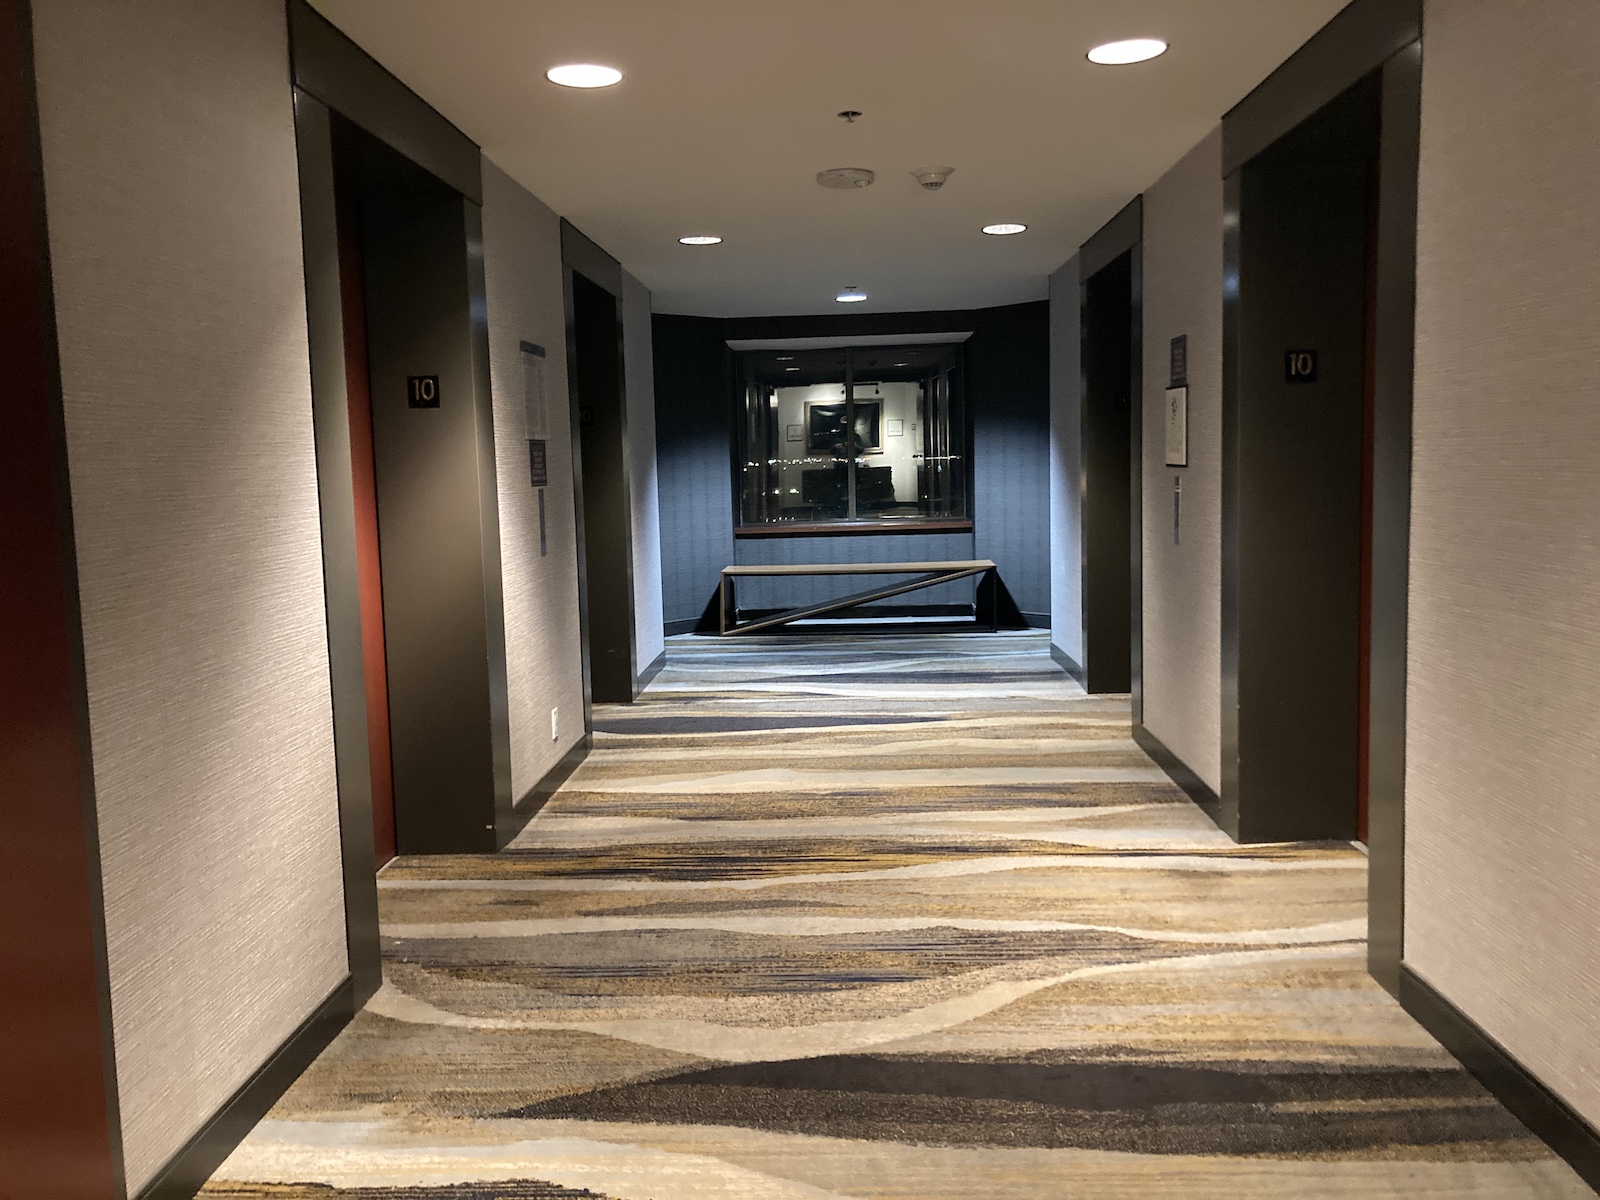 Image of hallway on 10th floor at the Sheraton Anchorage hotel